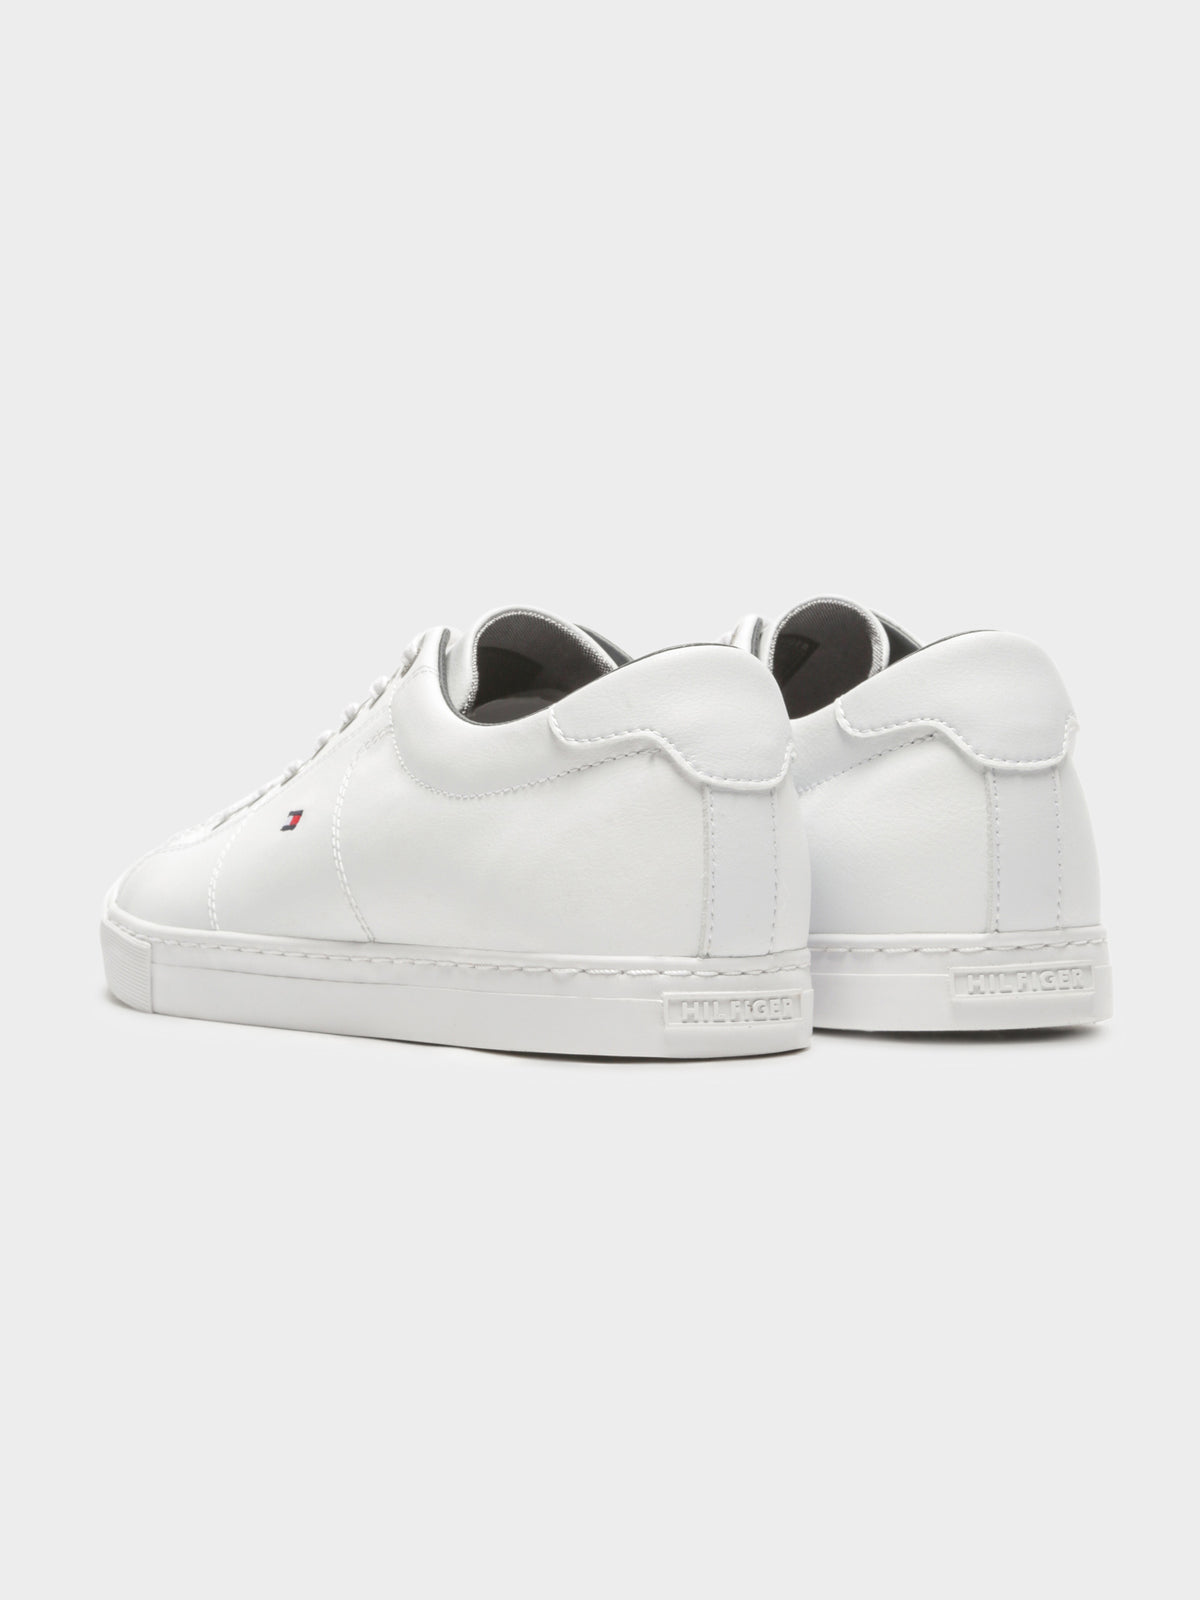 Mens Essential Sneaker in White Leather